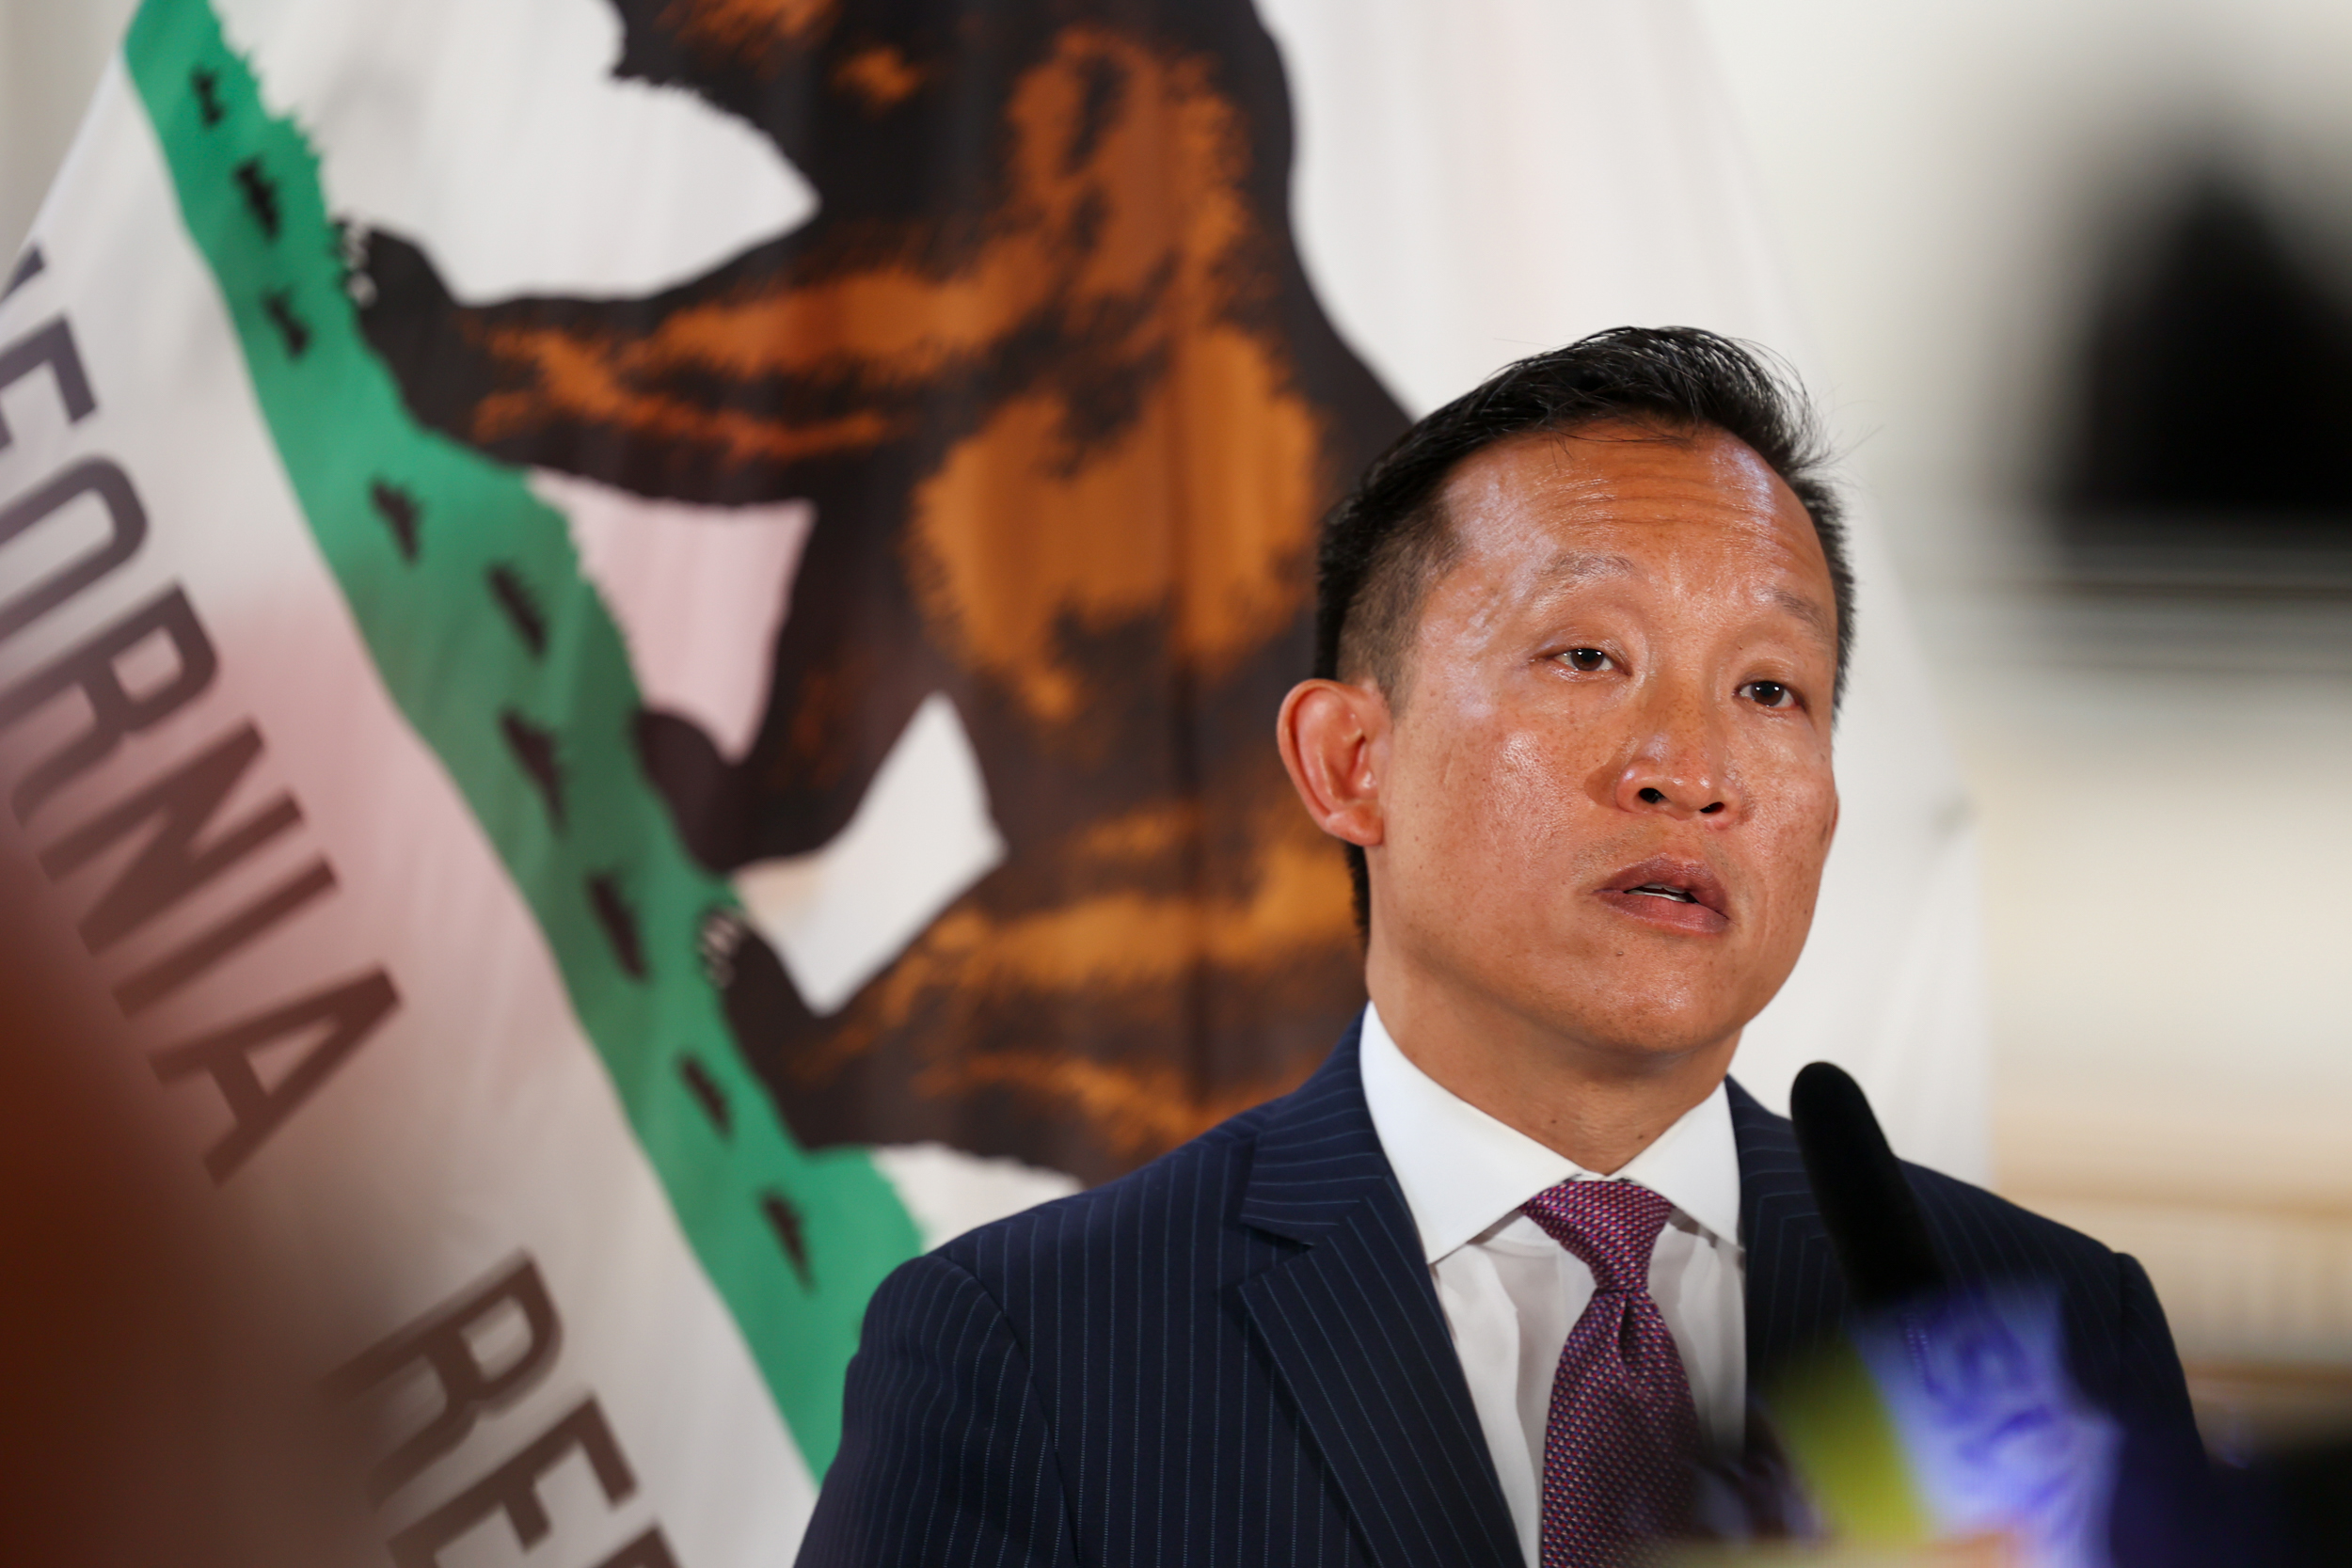 City Attorney David Chiu speaking in front of a California flag.